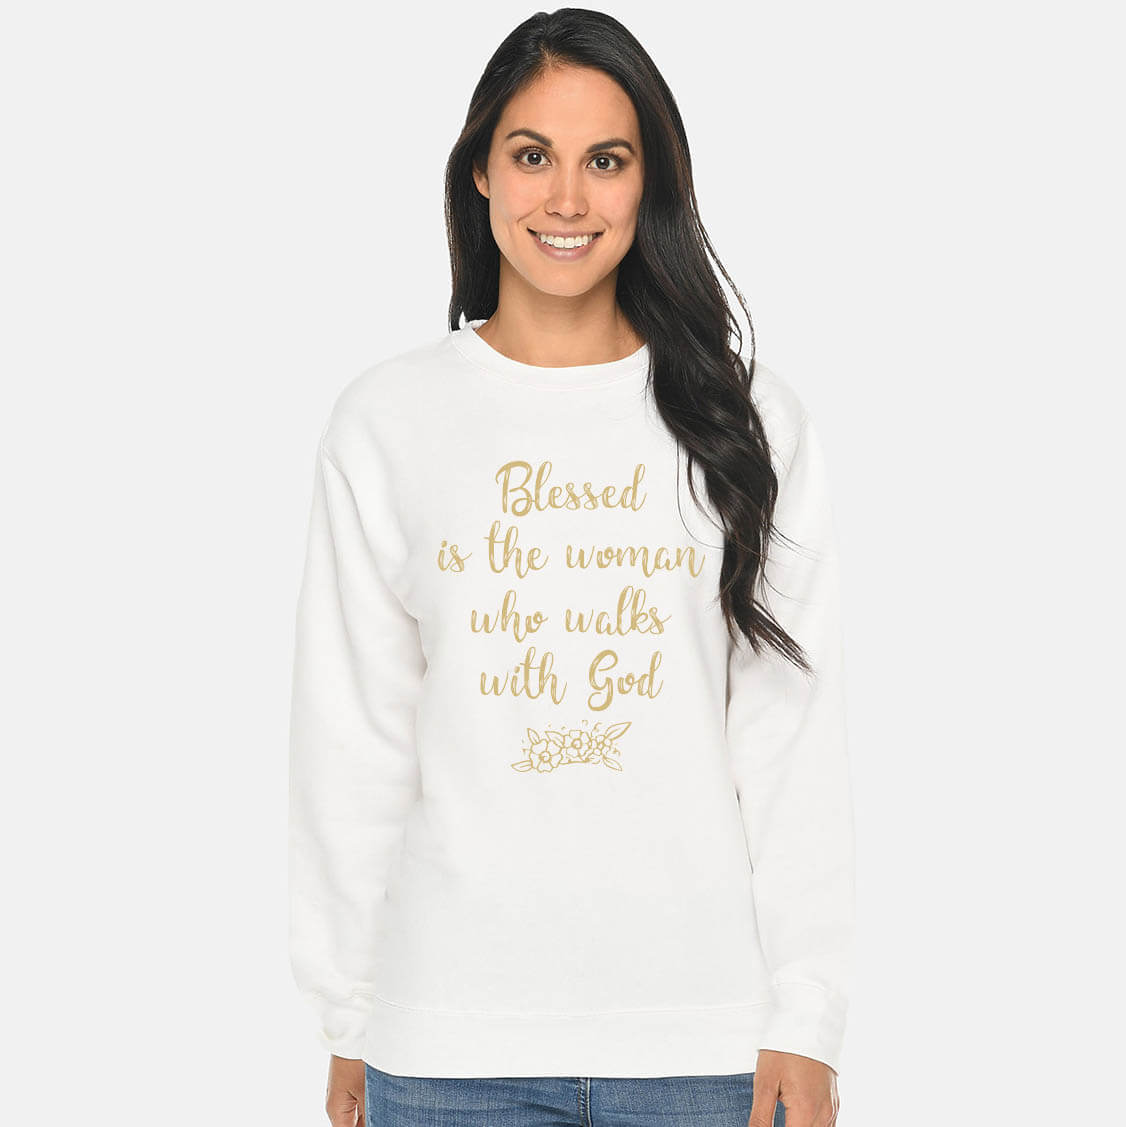 Blessed Is The Woman Who Walks With God Crewneck Sweatshirt